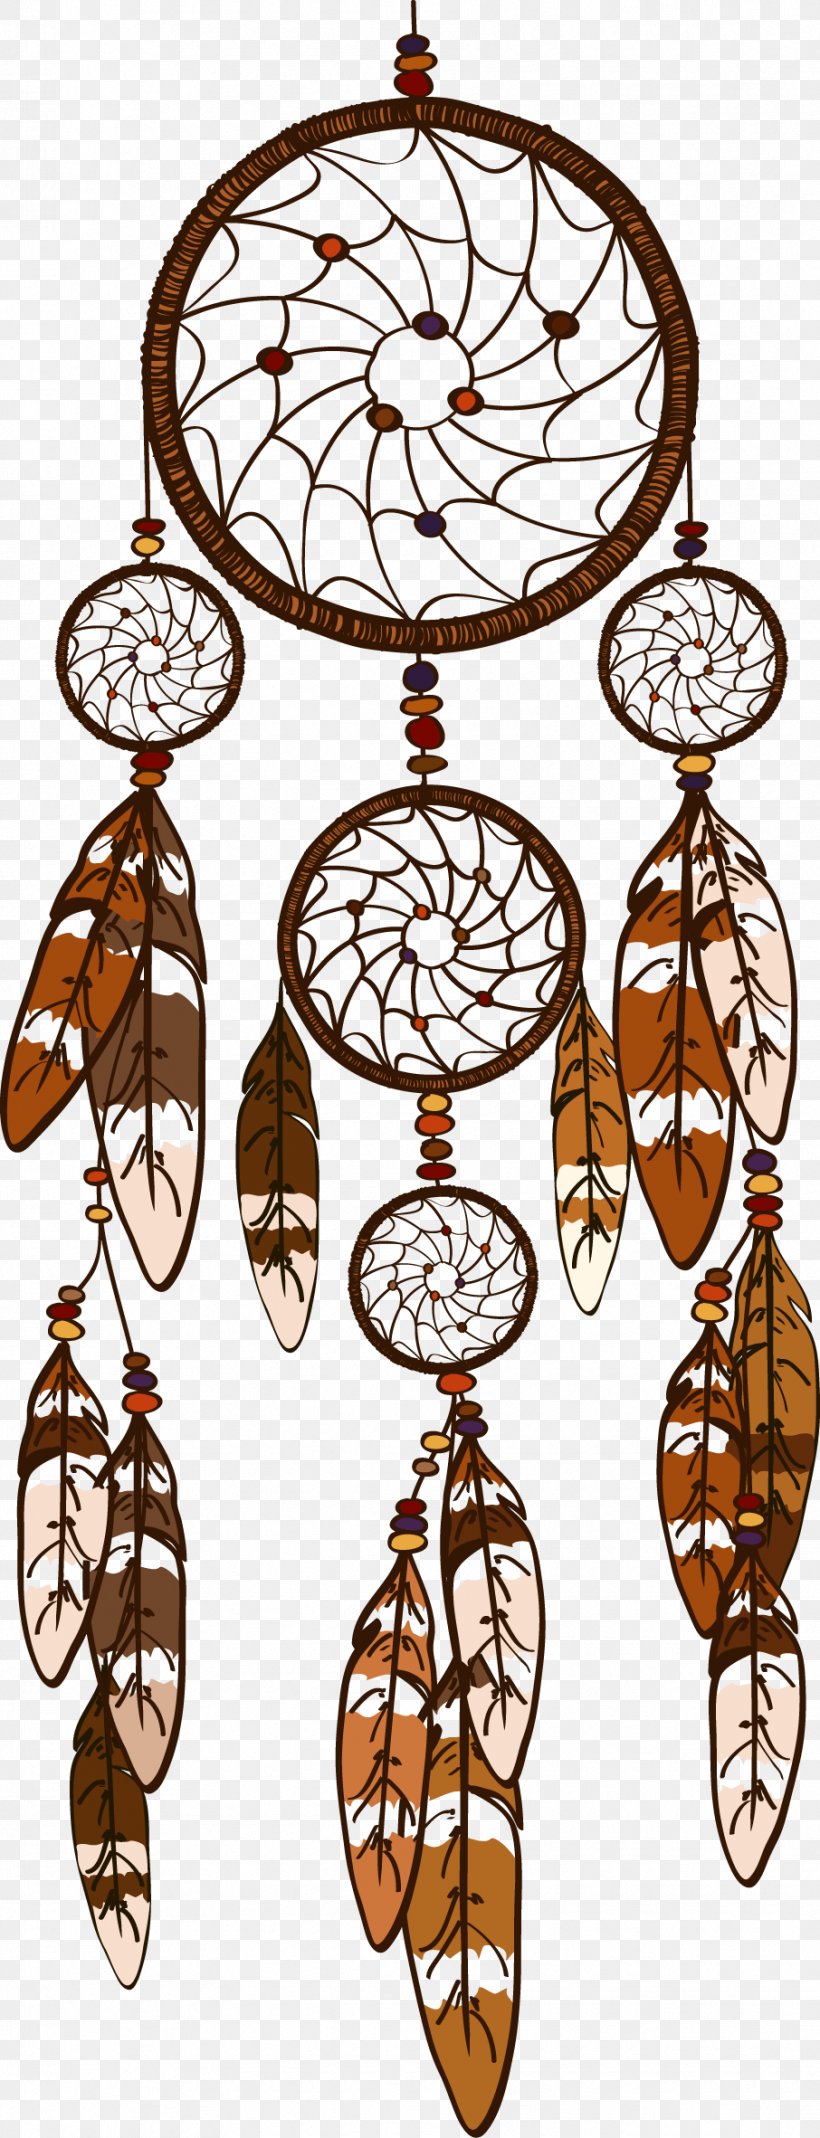 Dreamcatcher Feather Illustration, PNG, 906x2363px, Dreamcatcher, Drawing, Feather, Ornament, Royaltyfree Download Free